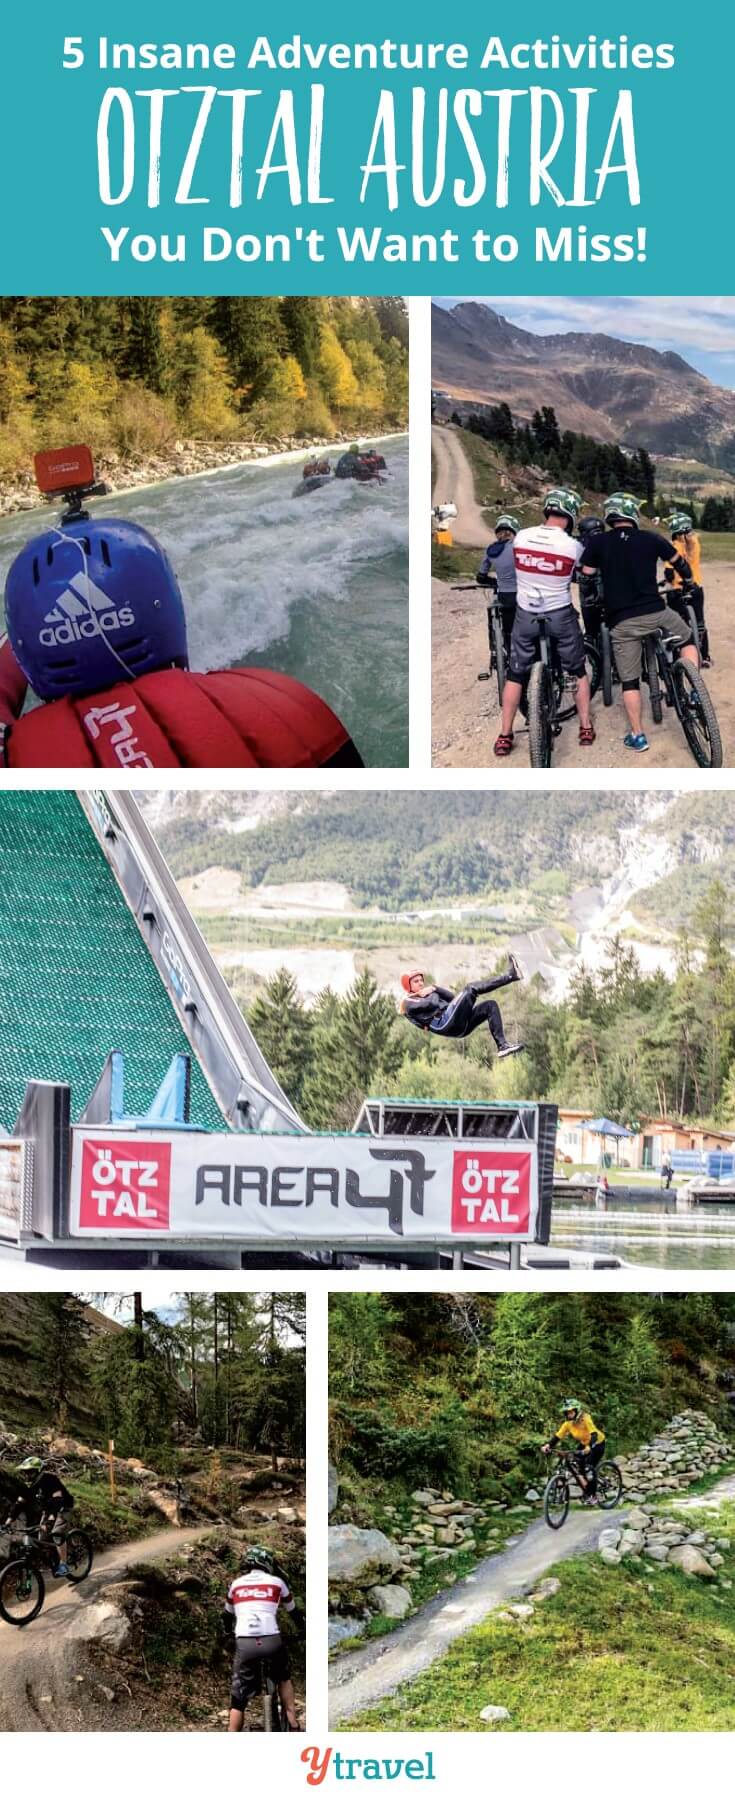 Planning a trip to Austria? If you love adventure activities, Tirol is the place for you to visit. Don't miss the Otztal Valley region for the famous Area 47 extreme water park, downhill mountain biking, ebiking and more